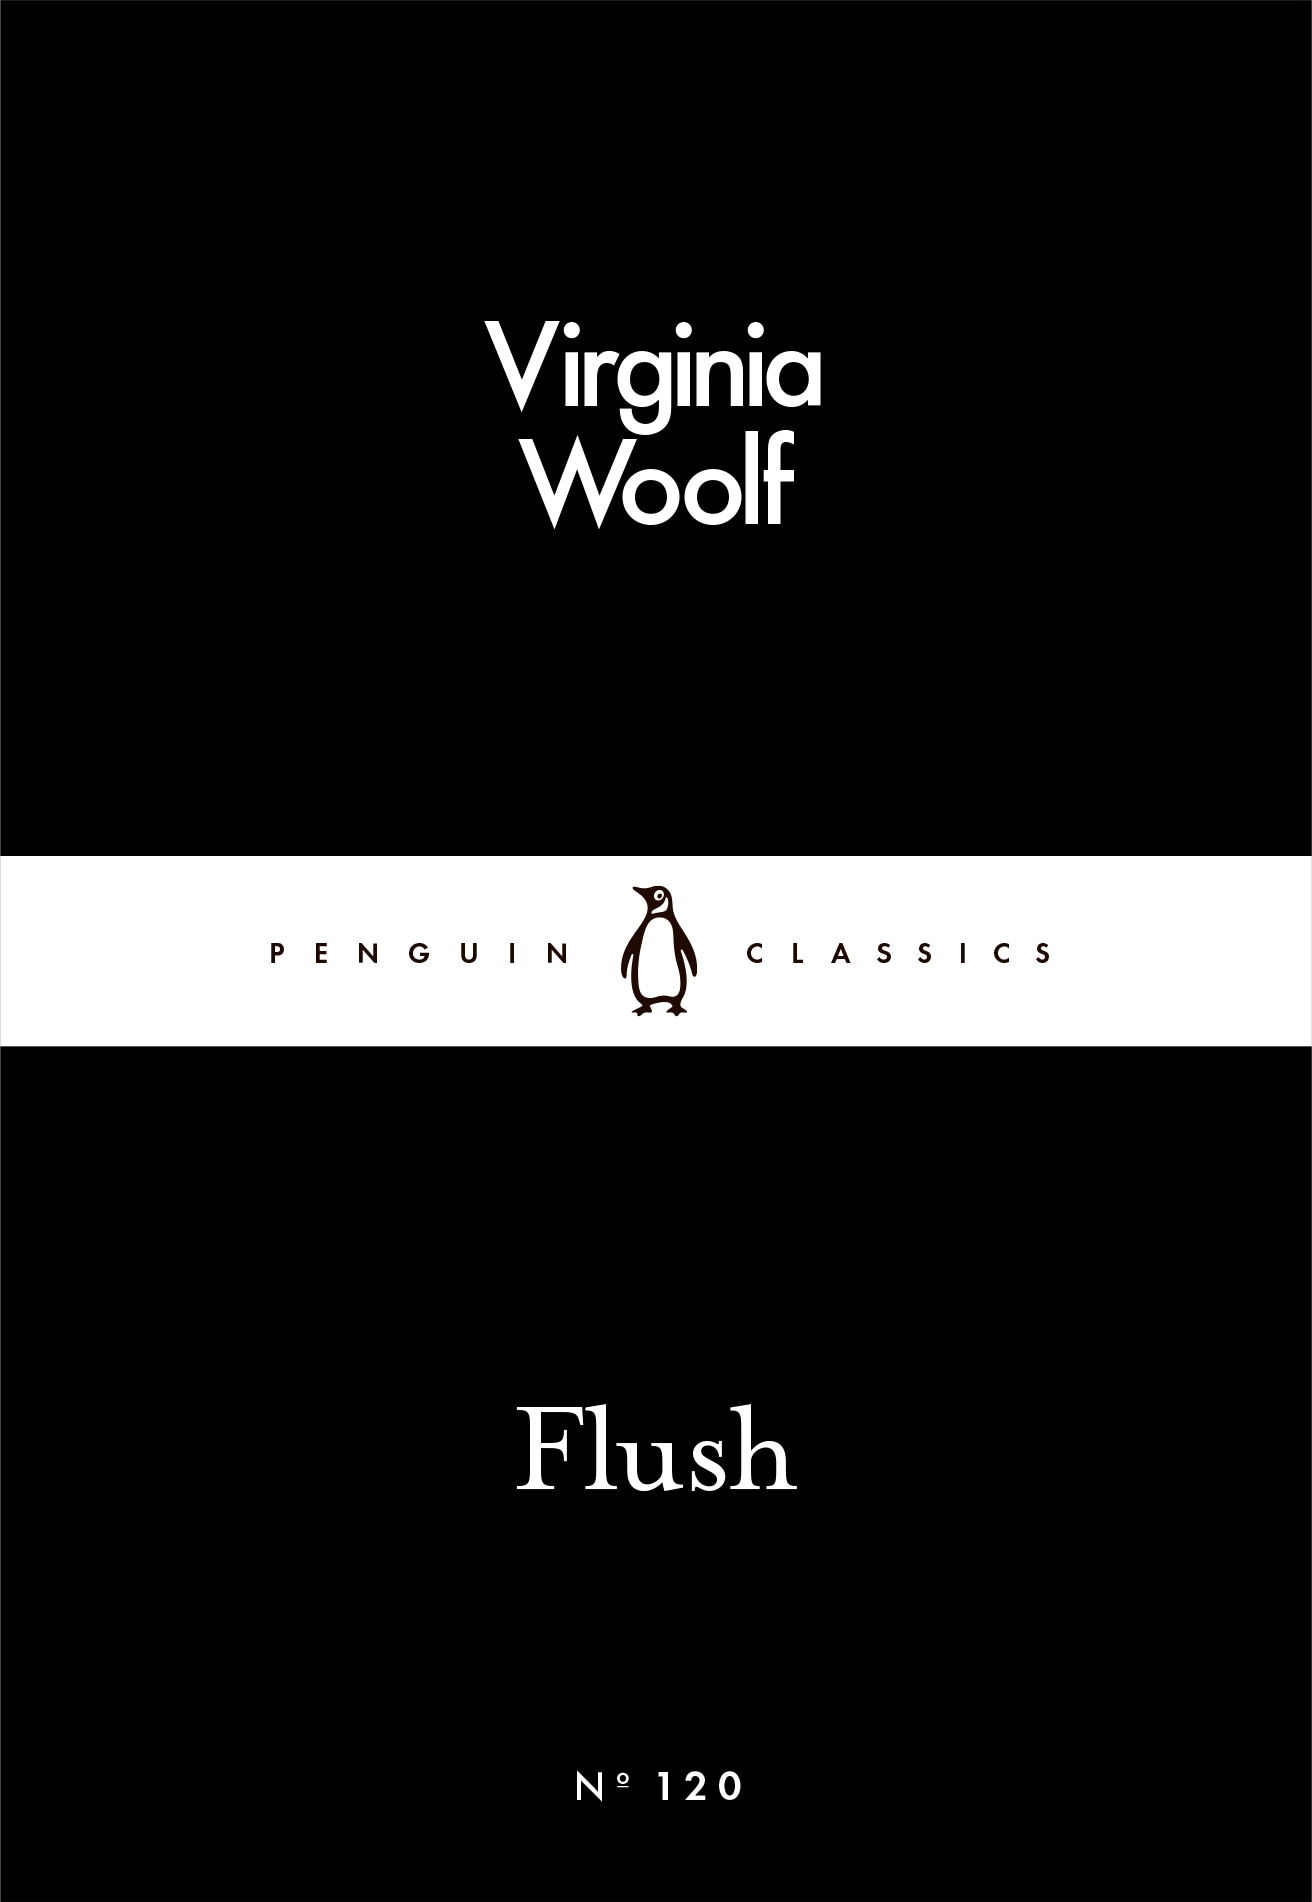 Book “Flush” by Virginia Woolf — March 3, 2016